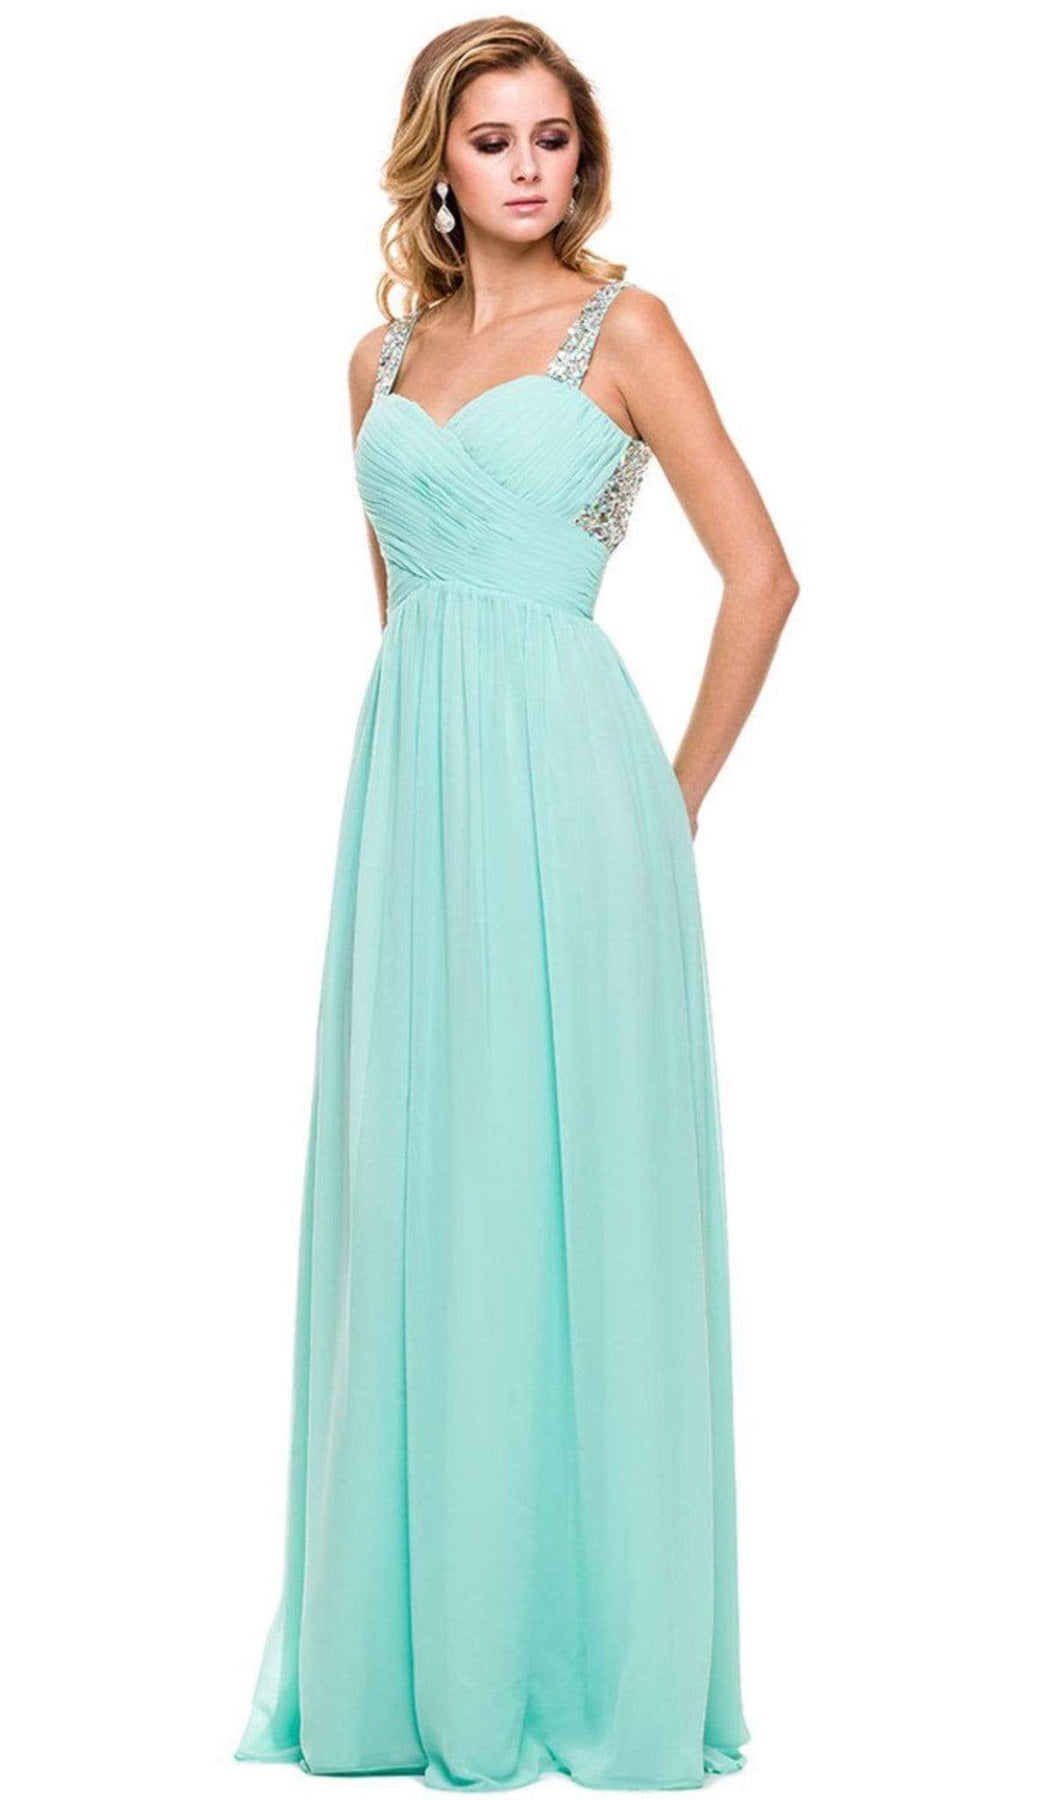 Nox Anabel - 8140 Rhinestone Embellished Ruched Long Dress Special Occasion Dress XS / Mint Green